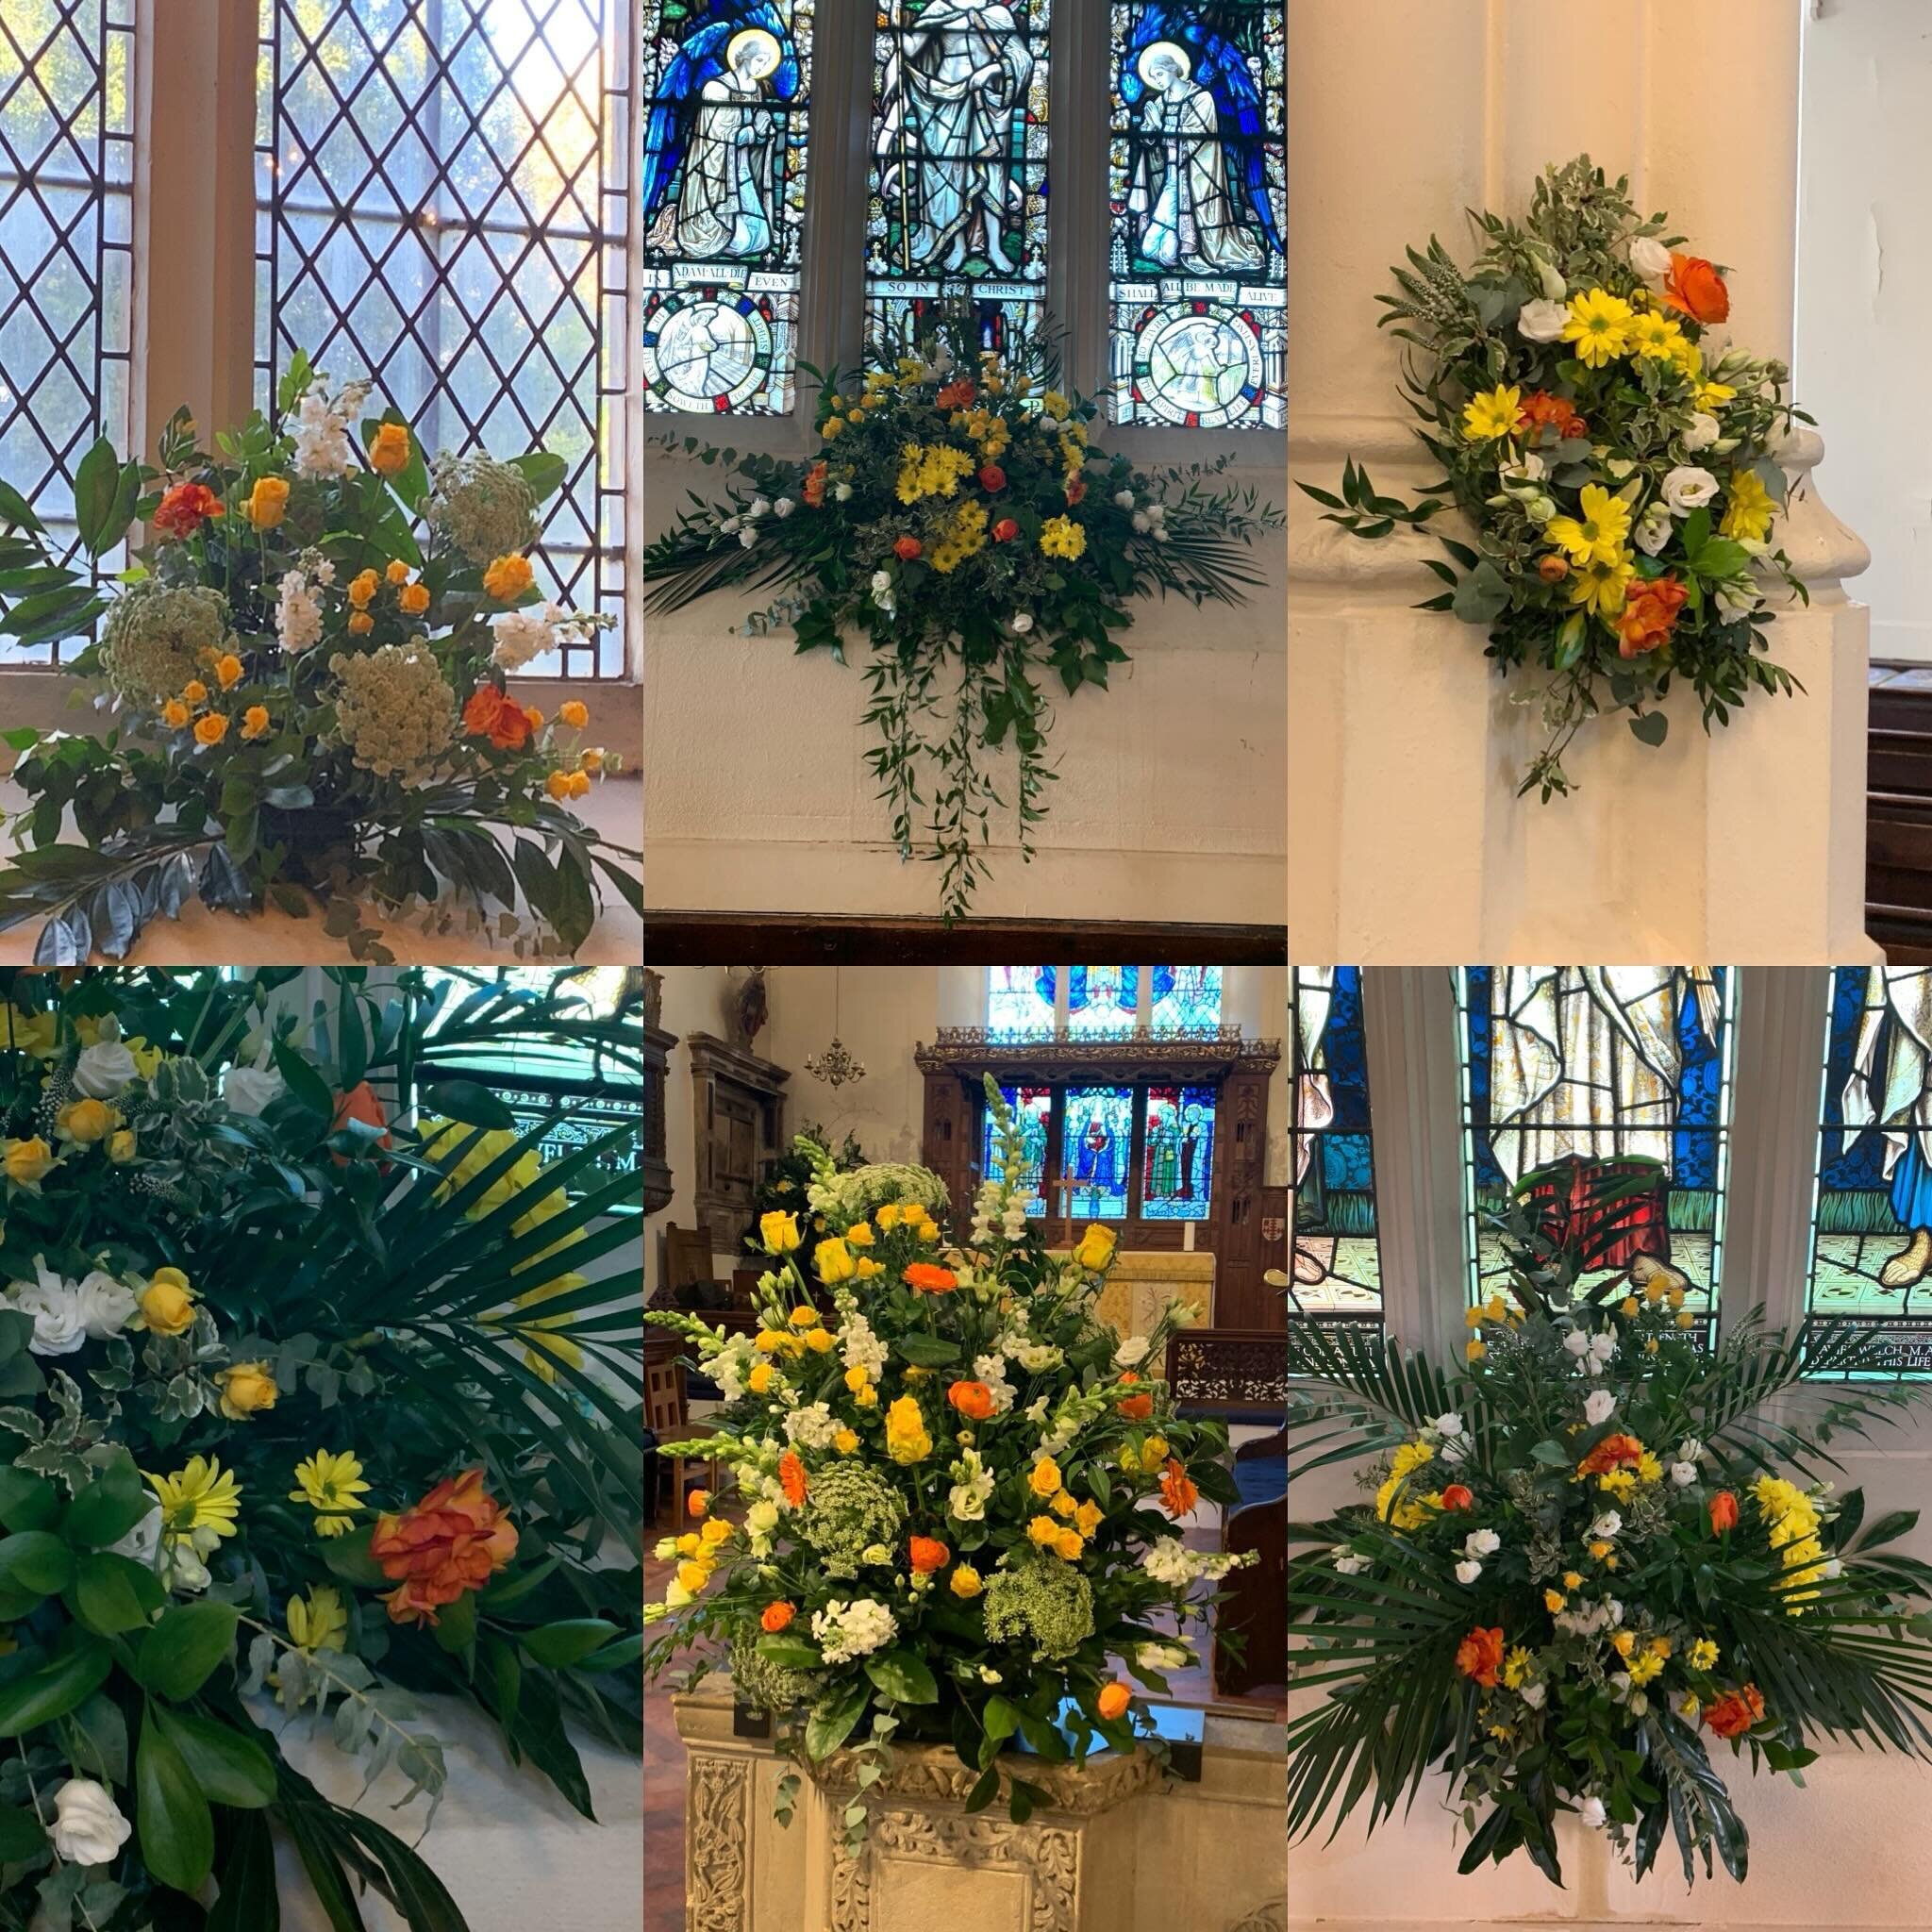 #churchflowers #easter come and see them tomorrow!